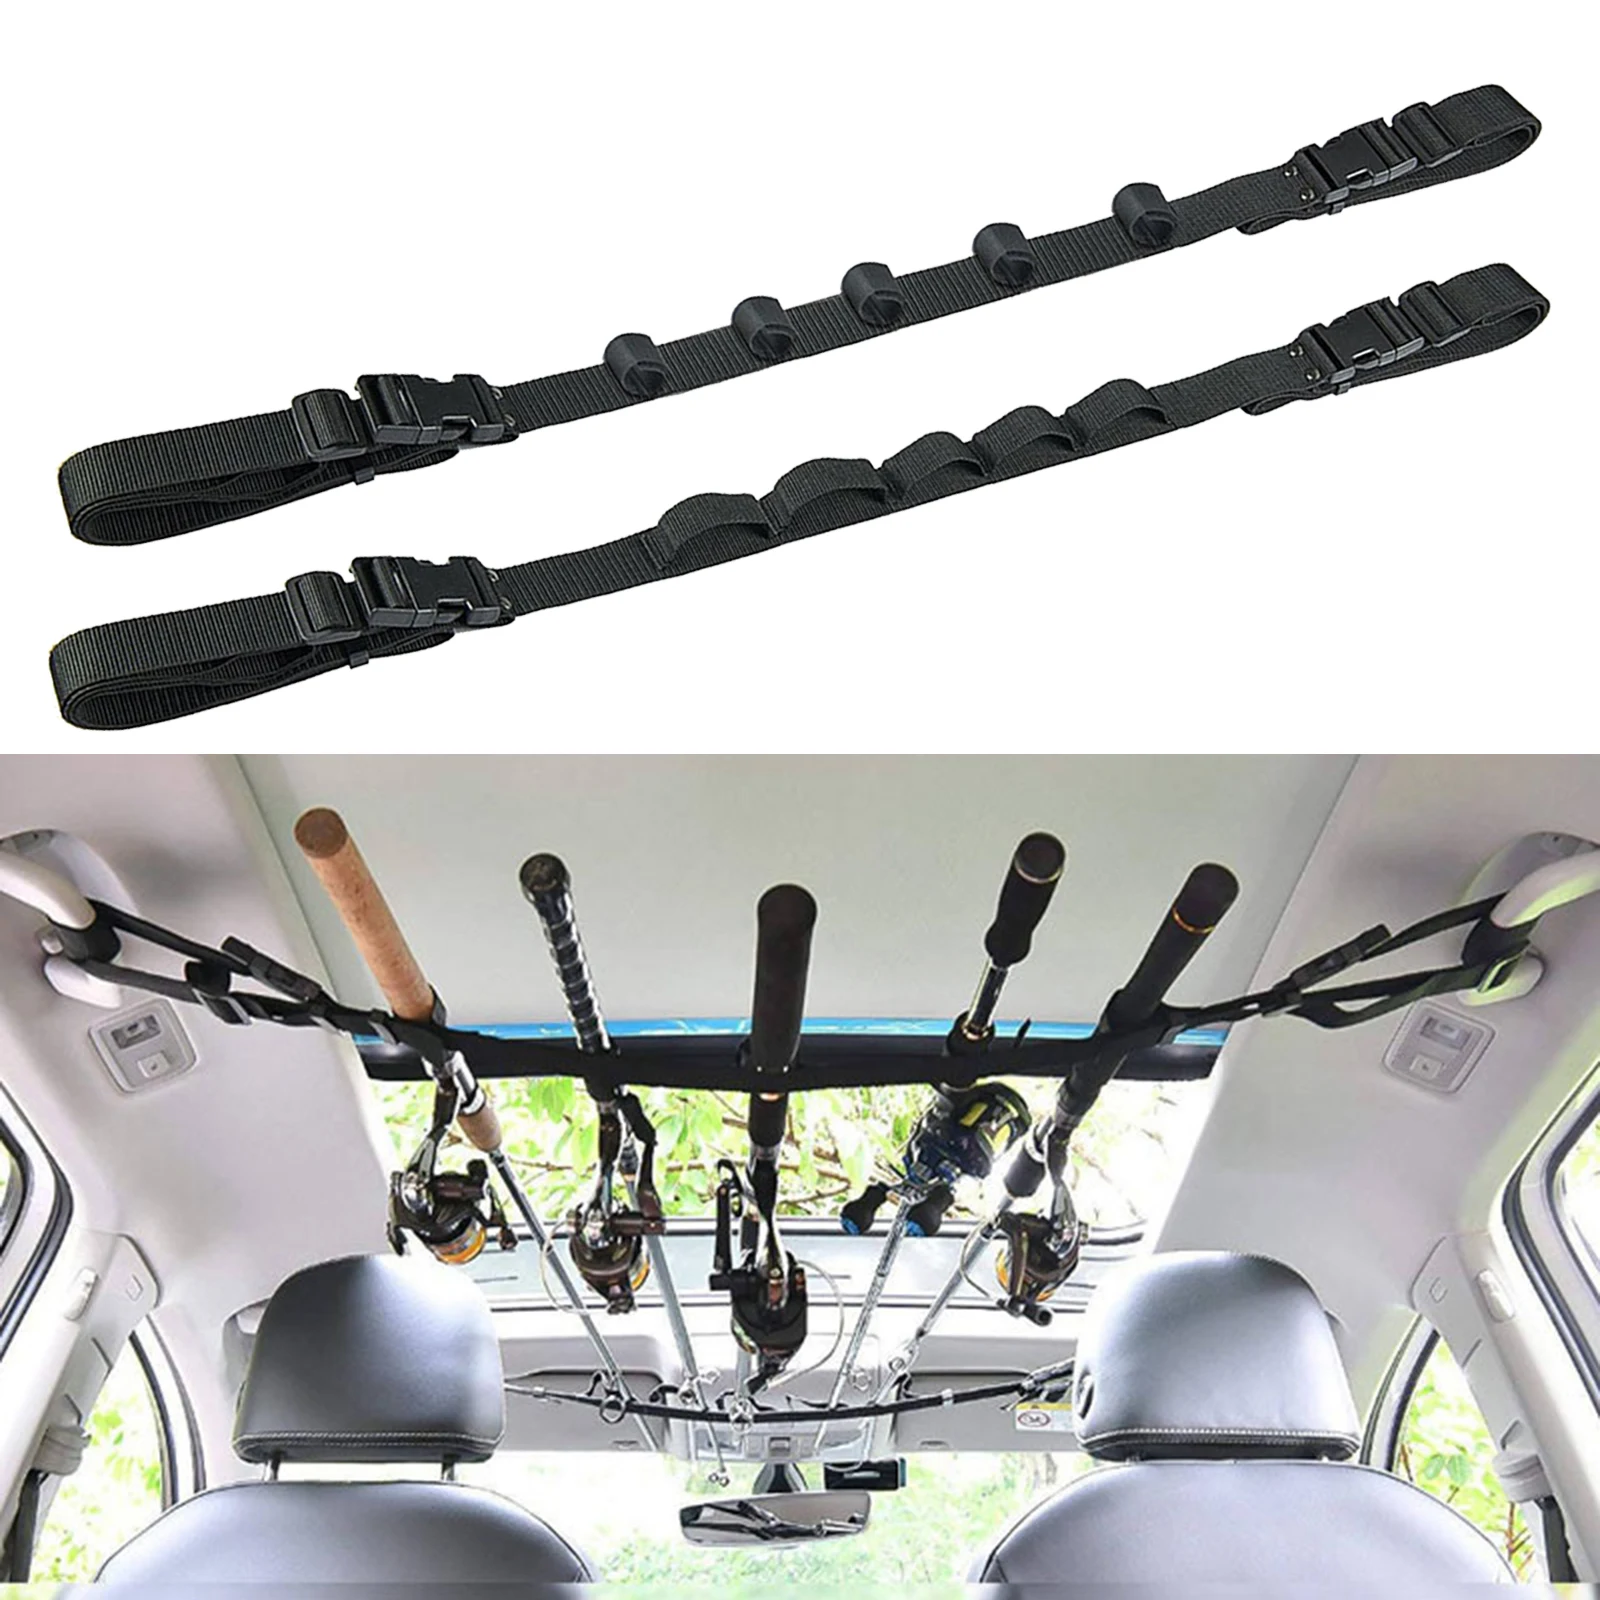 2pcs Vehicle Fishing Rod Holder, Durable Fishing Pole Carry Rack Strap Belt Carrier with Adjustable Paste Straps Scroll